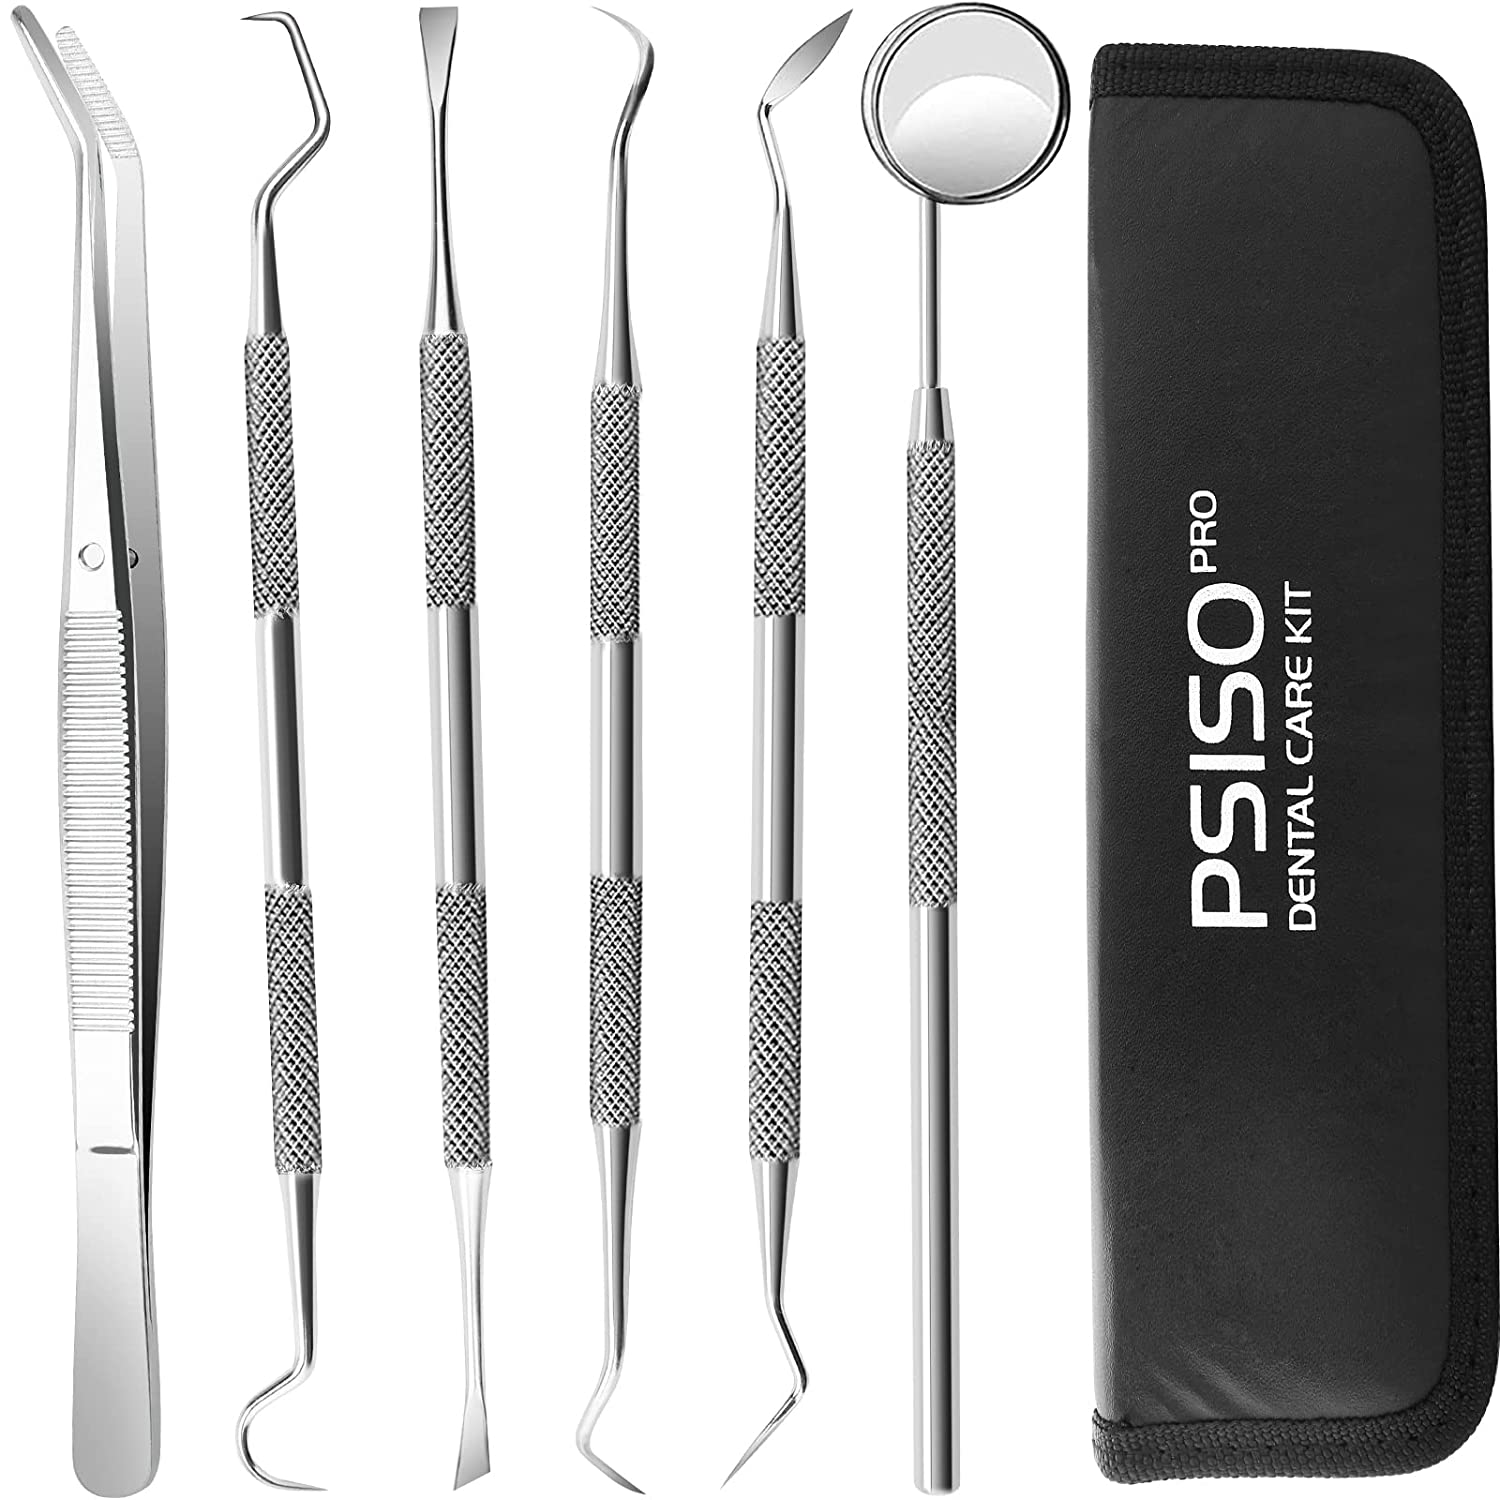 Dental Tools, 5 Pcs Professional Dentist Picks for Teeth Cleaning, Stainless Steel Teeth Cleaner Kit Plaque Remover, Dental Scaler Hygiene Set Oral Care Tools, Tooth Scraper Plaque Tartar Remover